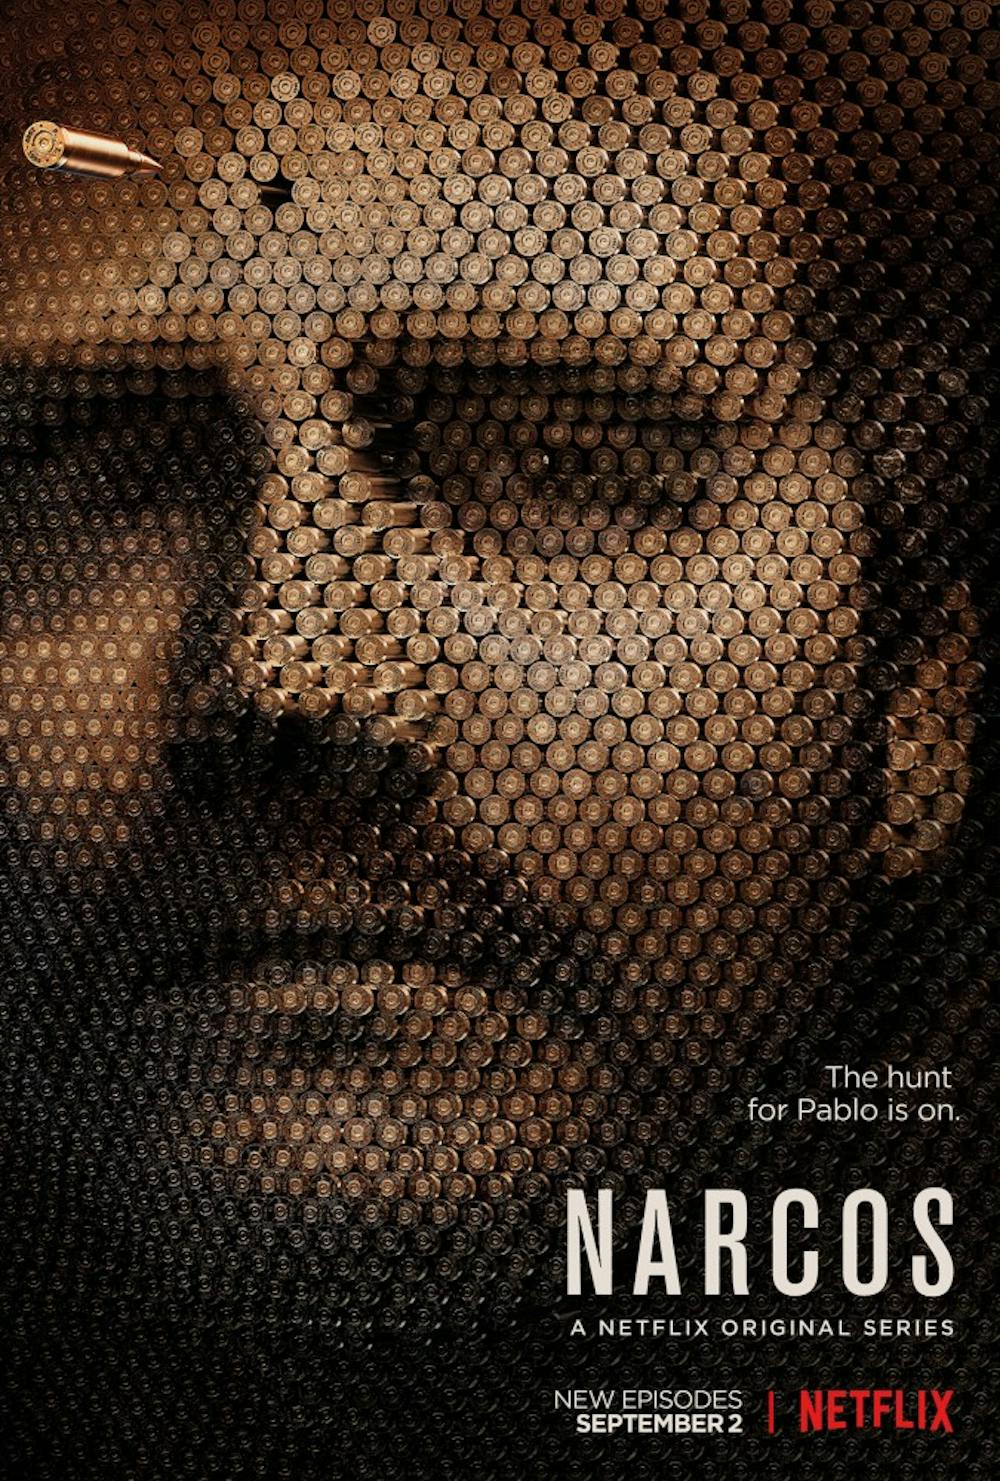 Did Game of Thrones ruin Narcos? 